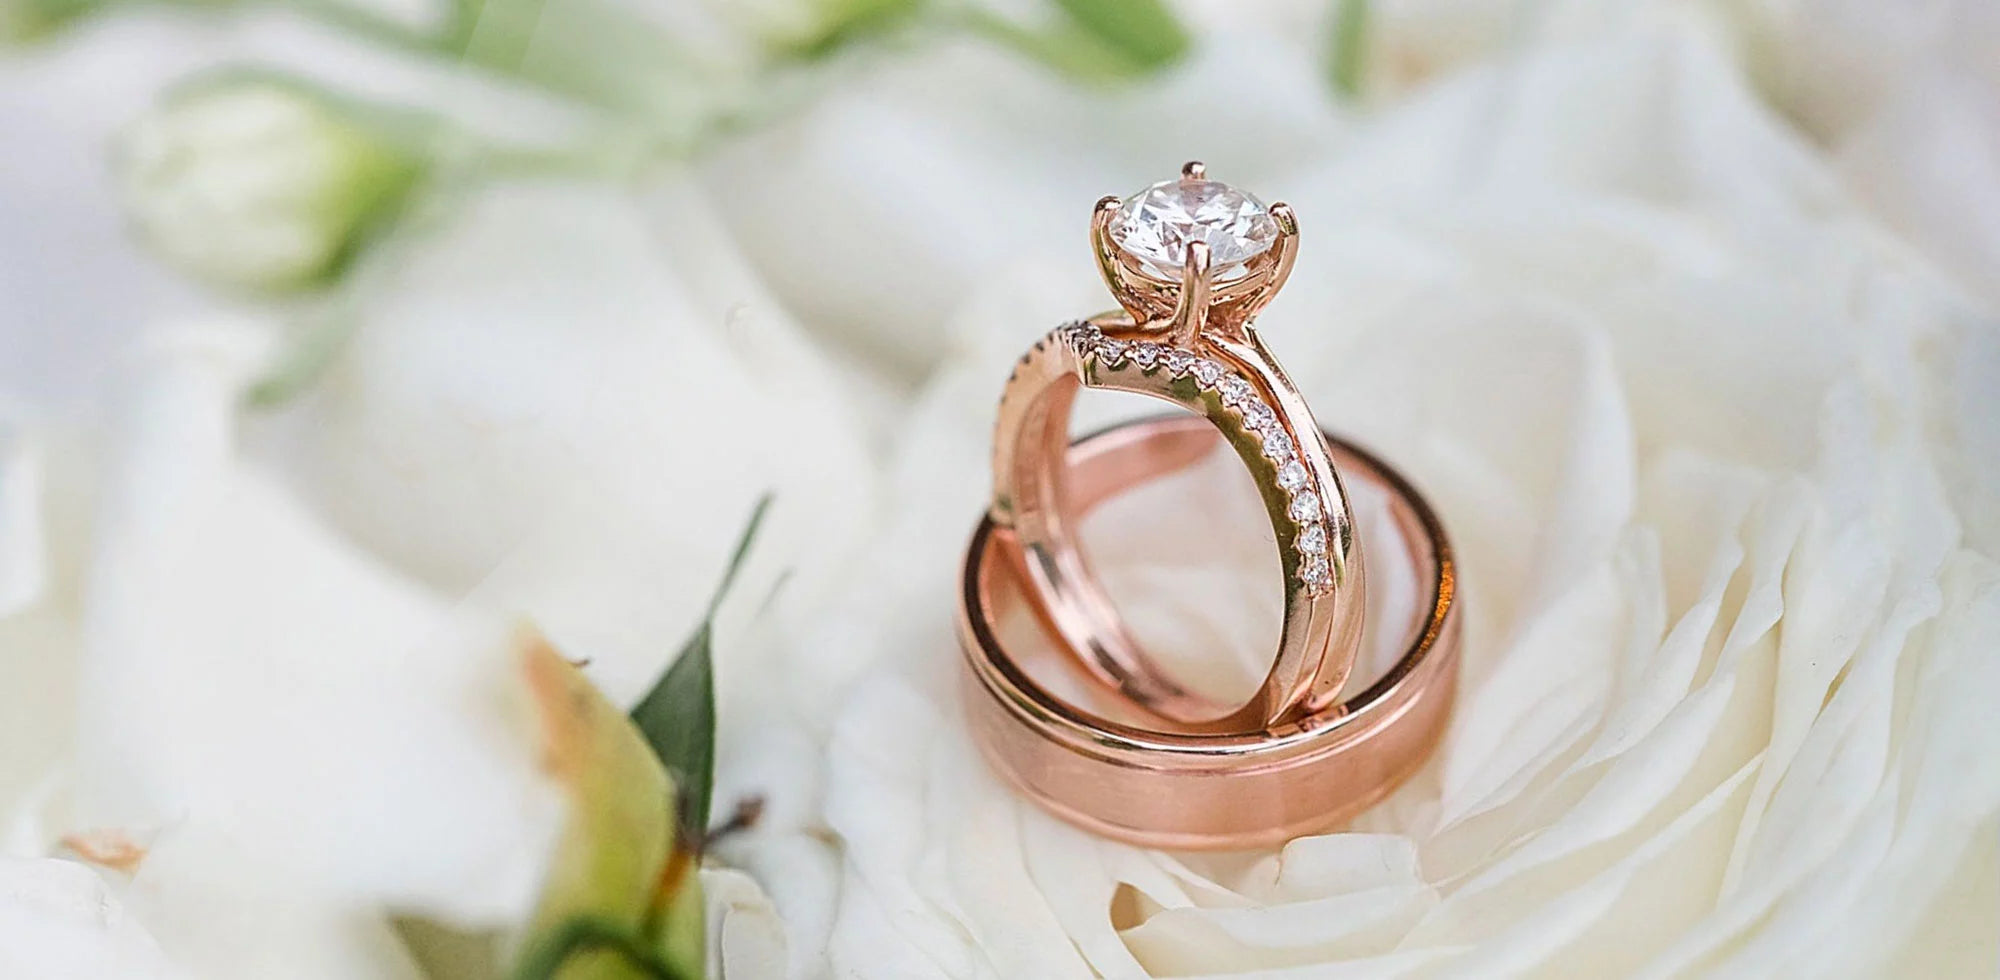 Bridal Ring Designs at Dublin Village Jewelers In OH